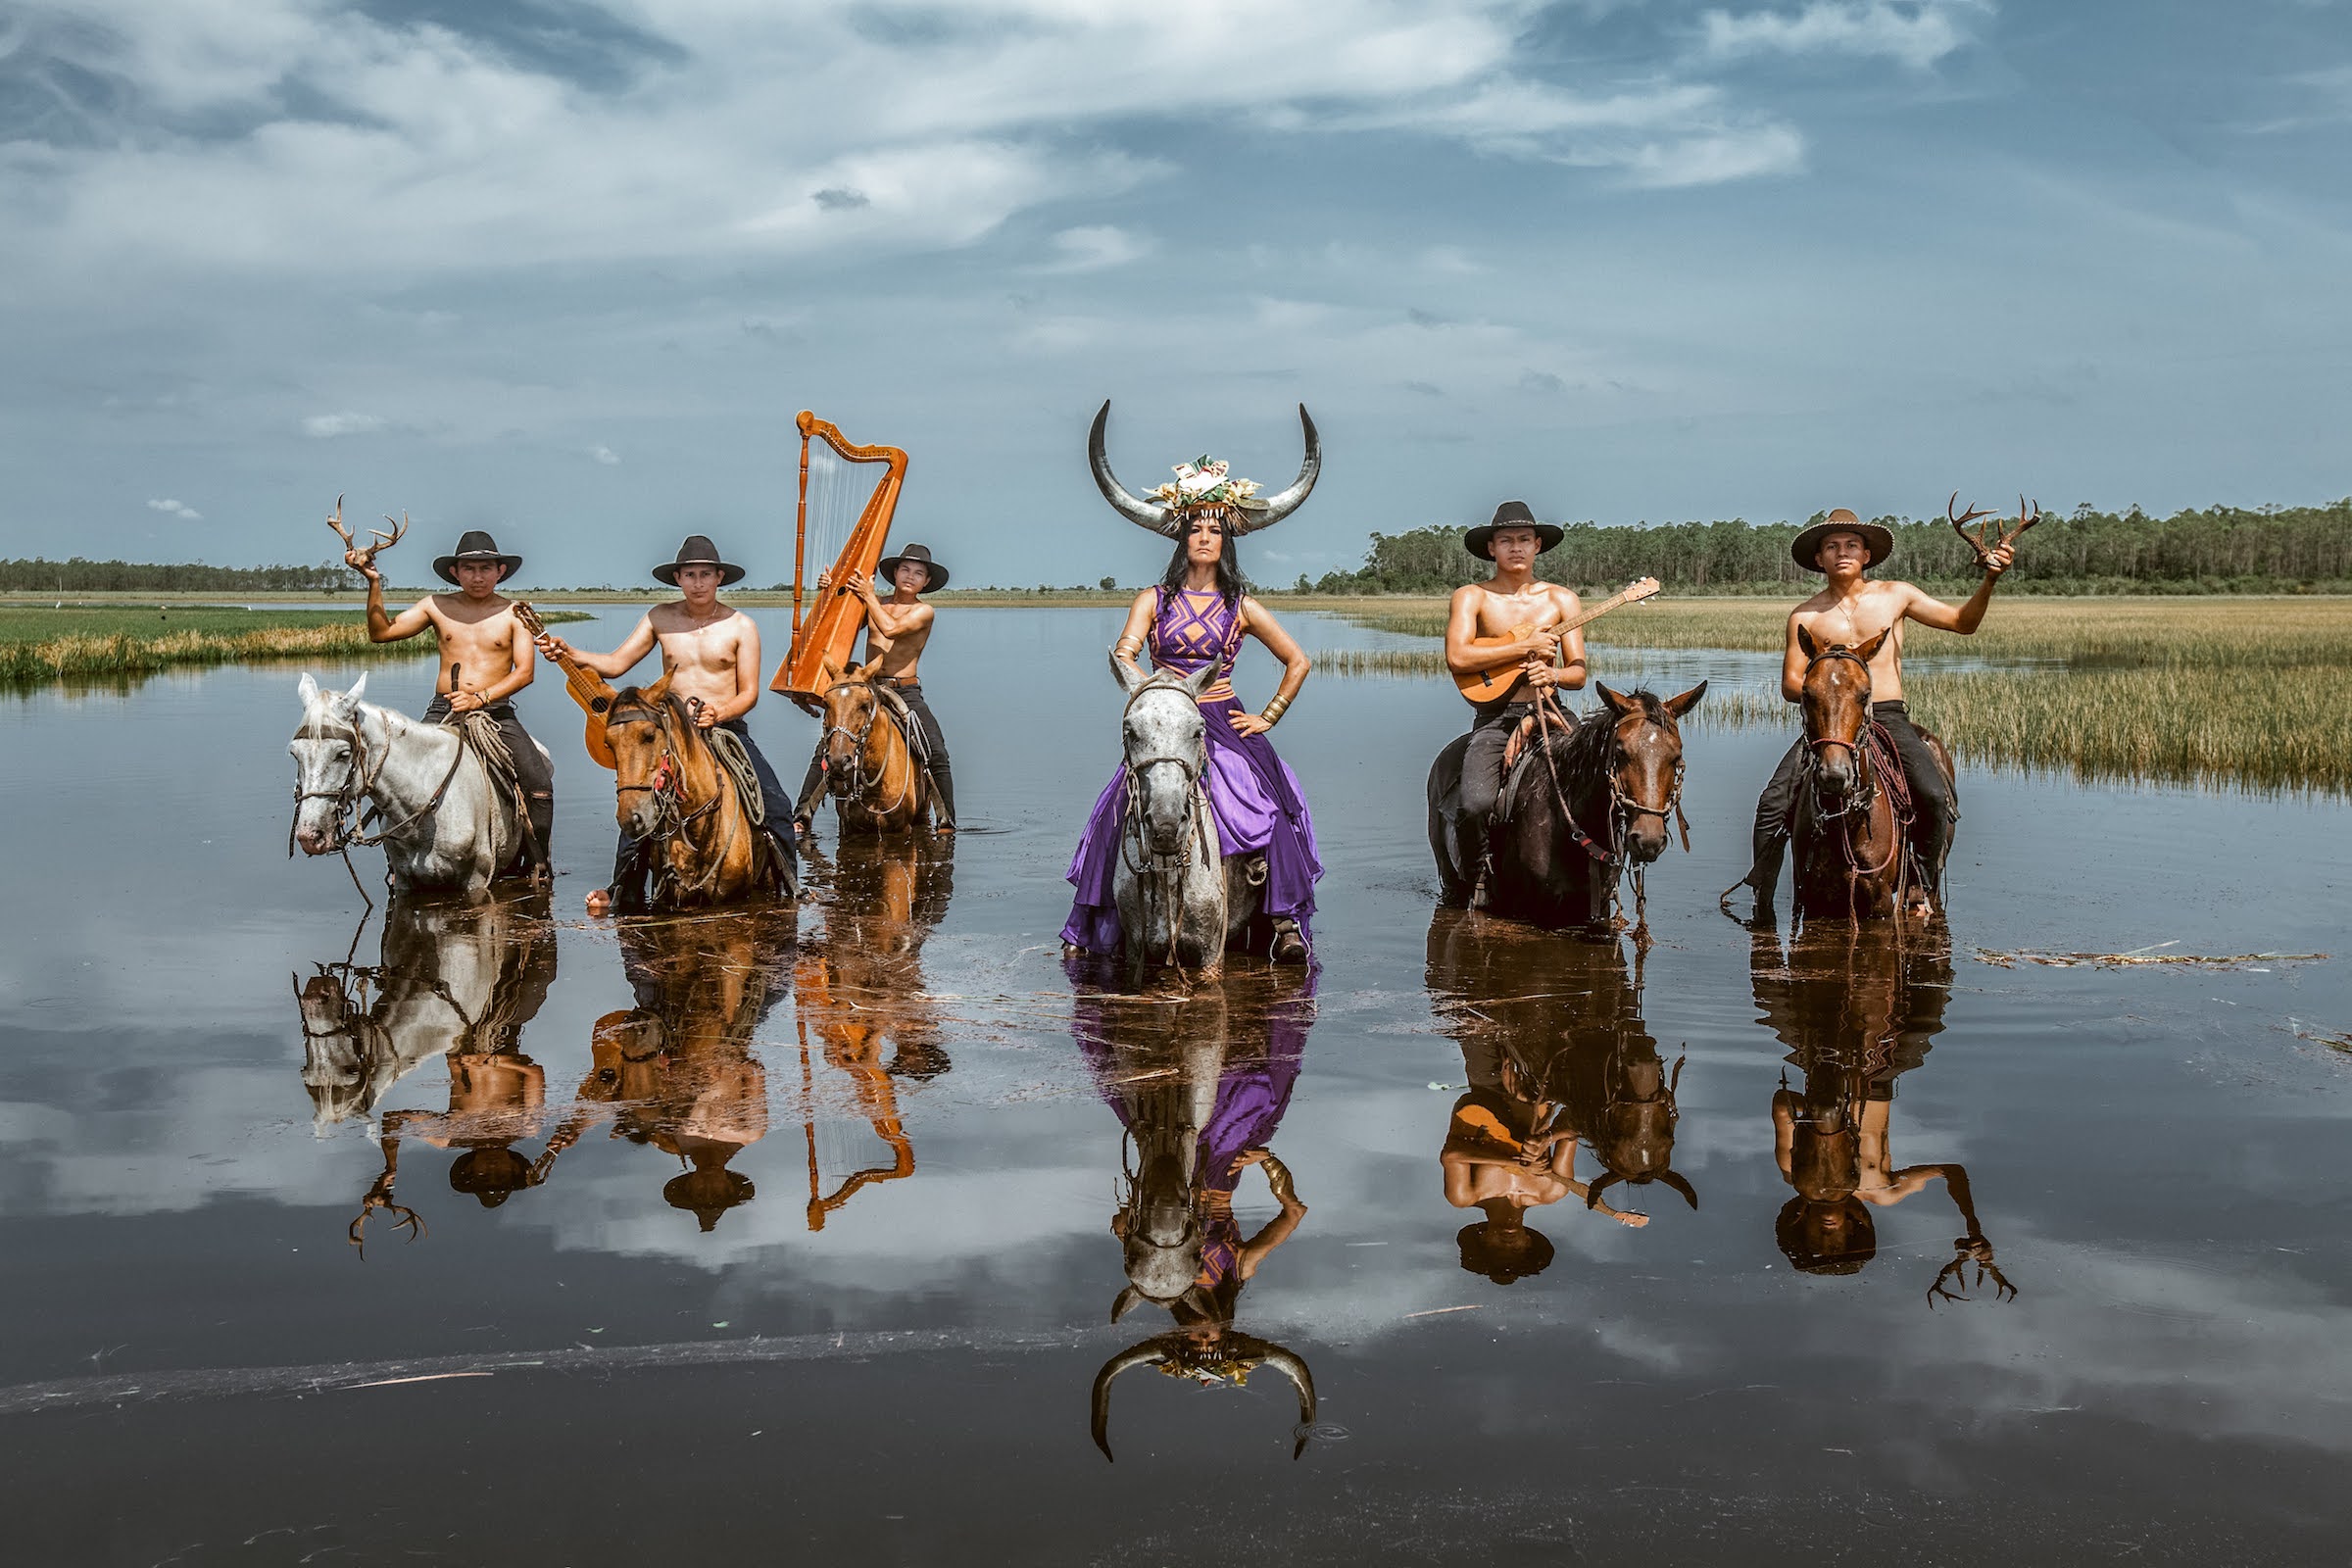 Band members from Cimarron in a river on horseback holding antlers and instruments.